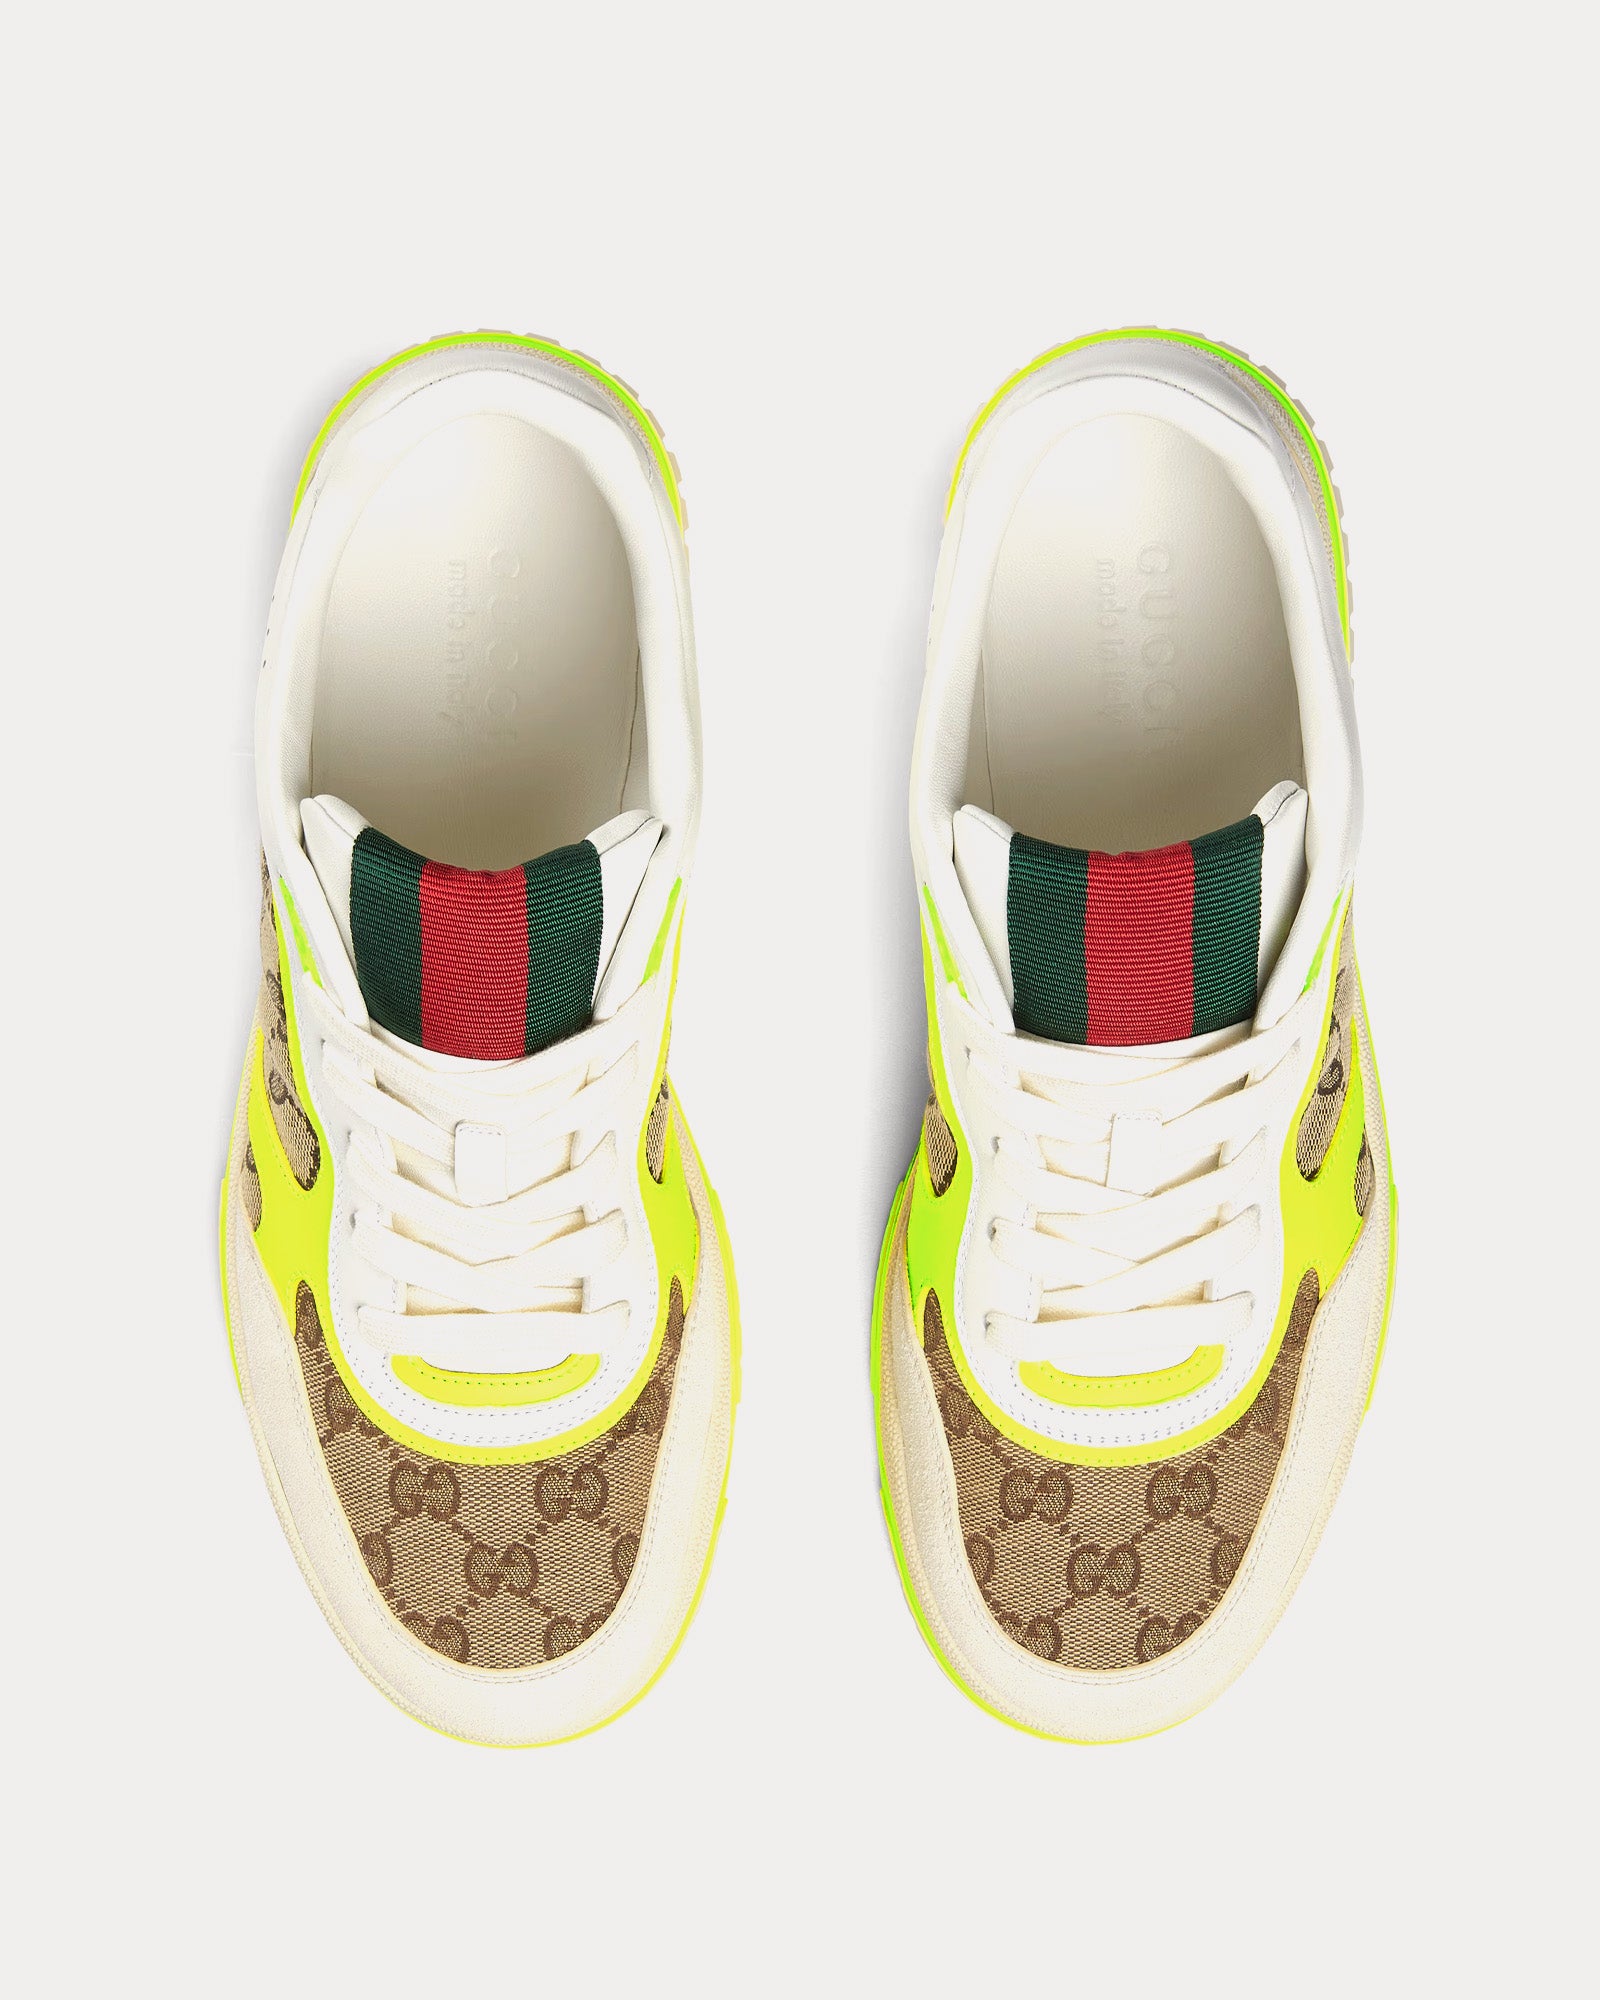 Gucci - Re-Web Leather with Original GG Canvas White / Yellow Low Top Sneakers